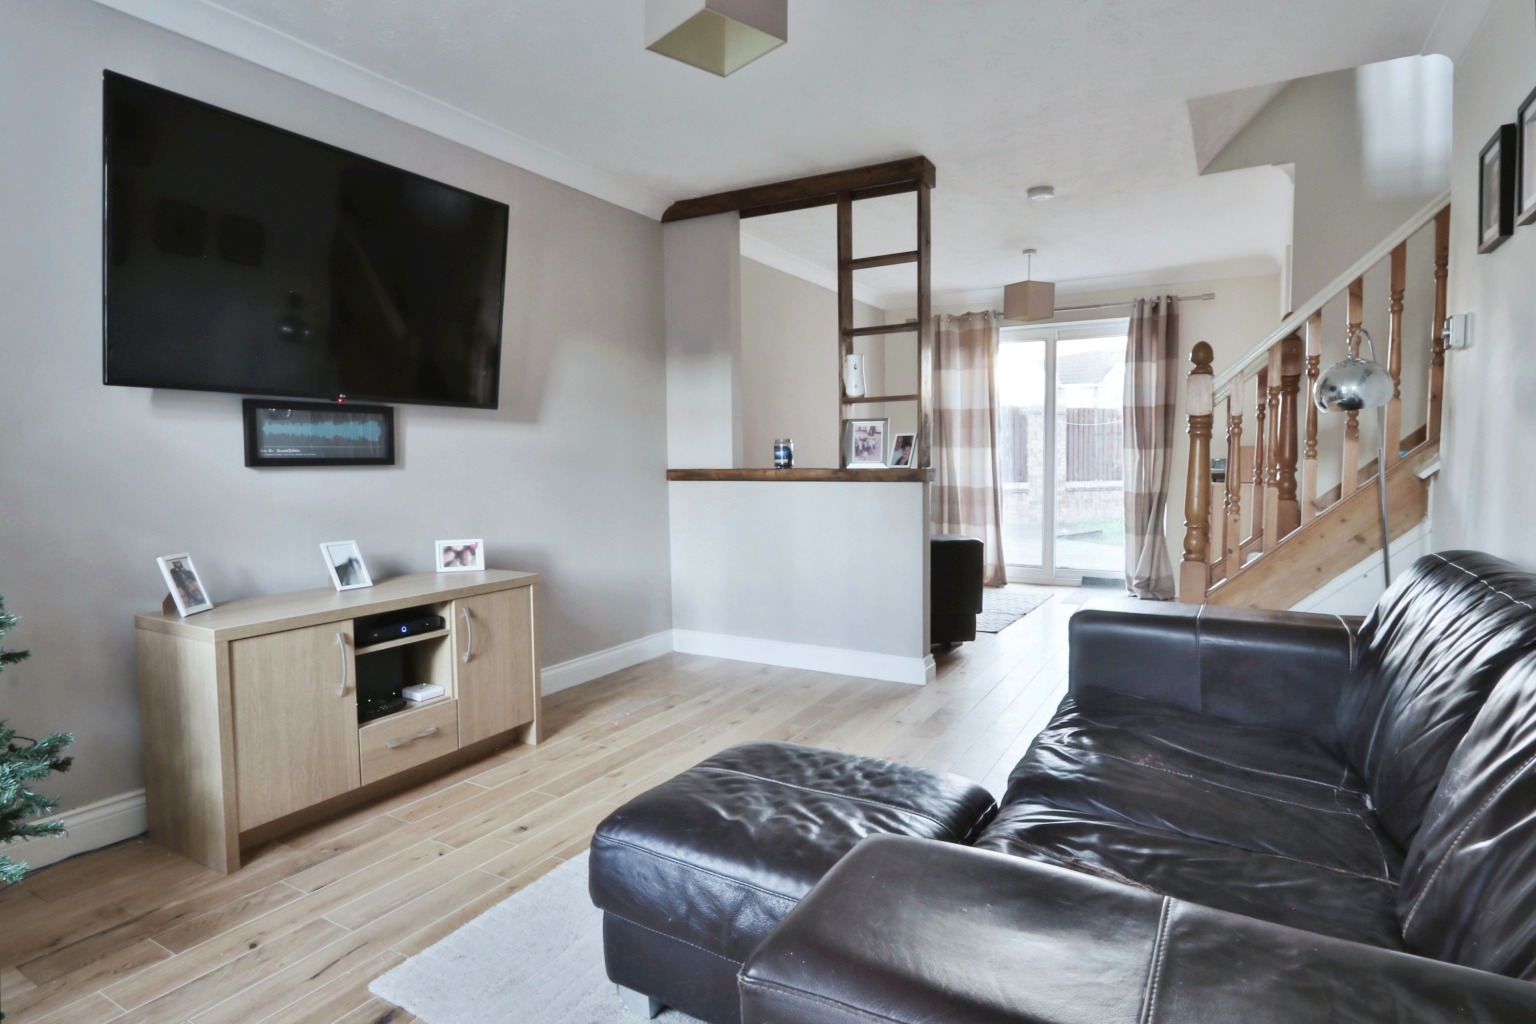 3 bed detached house for sale in Bradgate Park, Hull  - Property Image 4